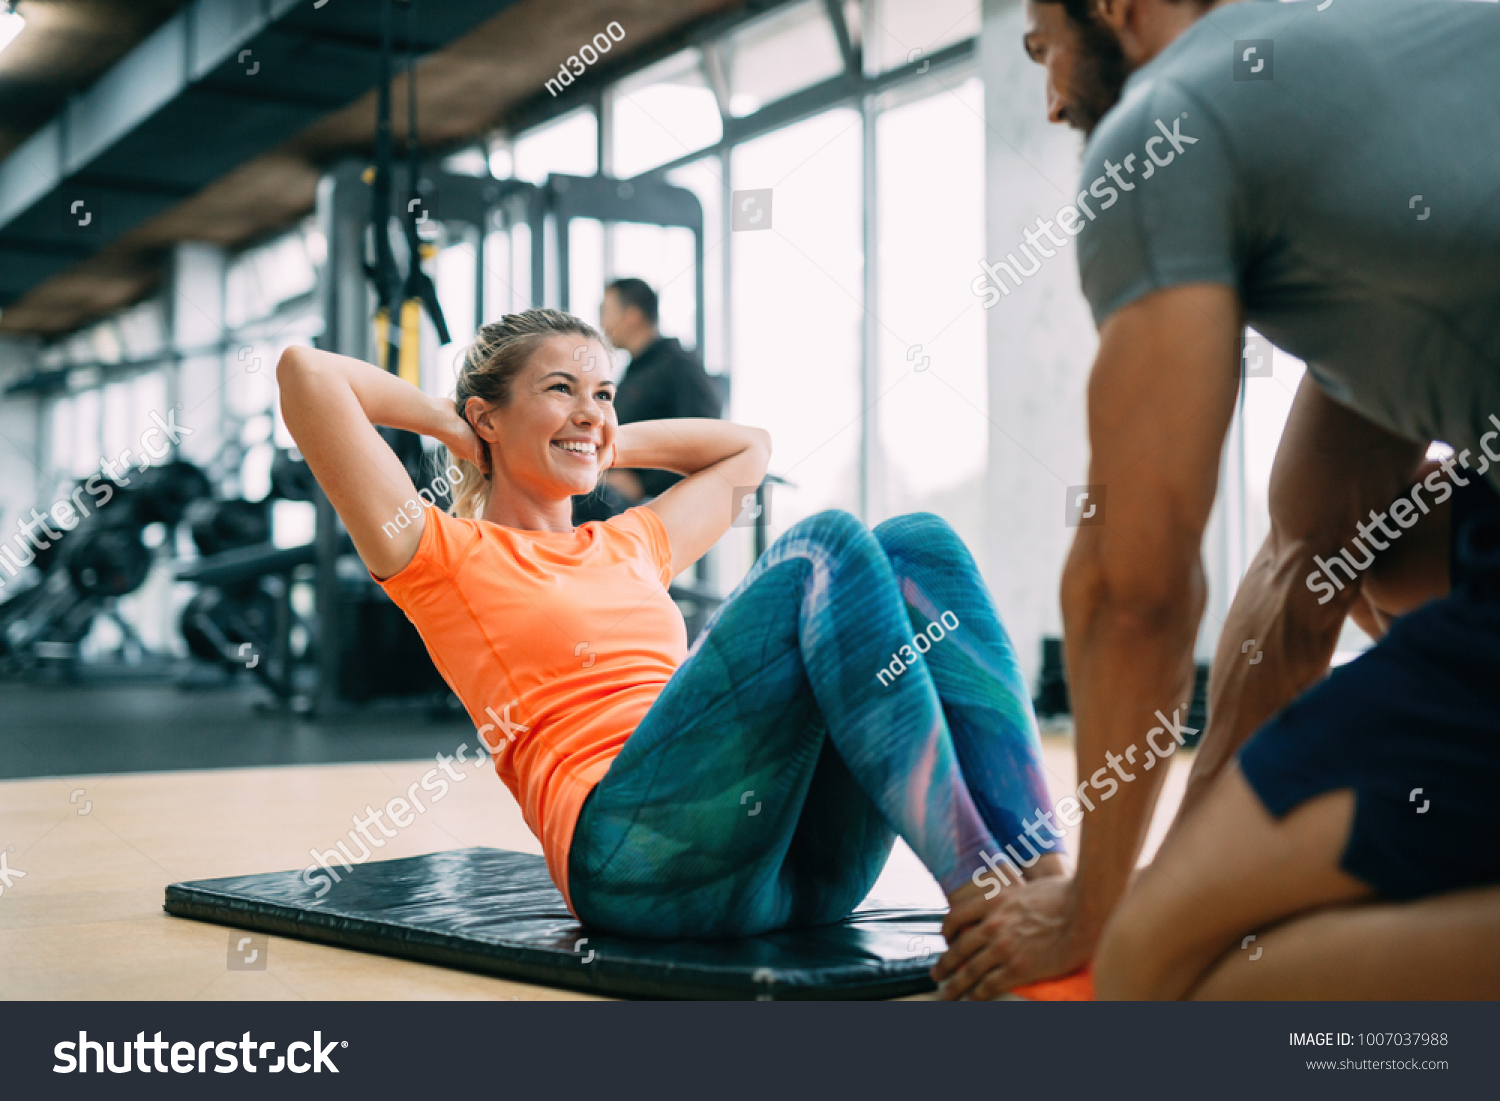 Personal trainer assisting woman lose weight #1007037988